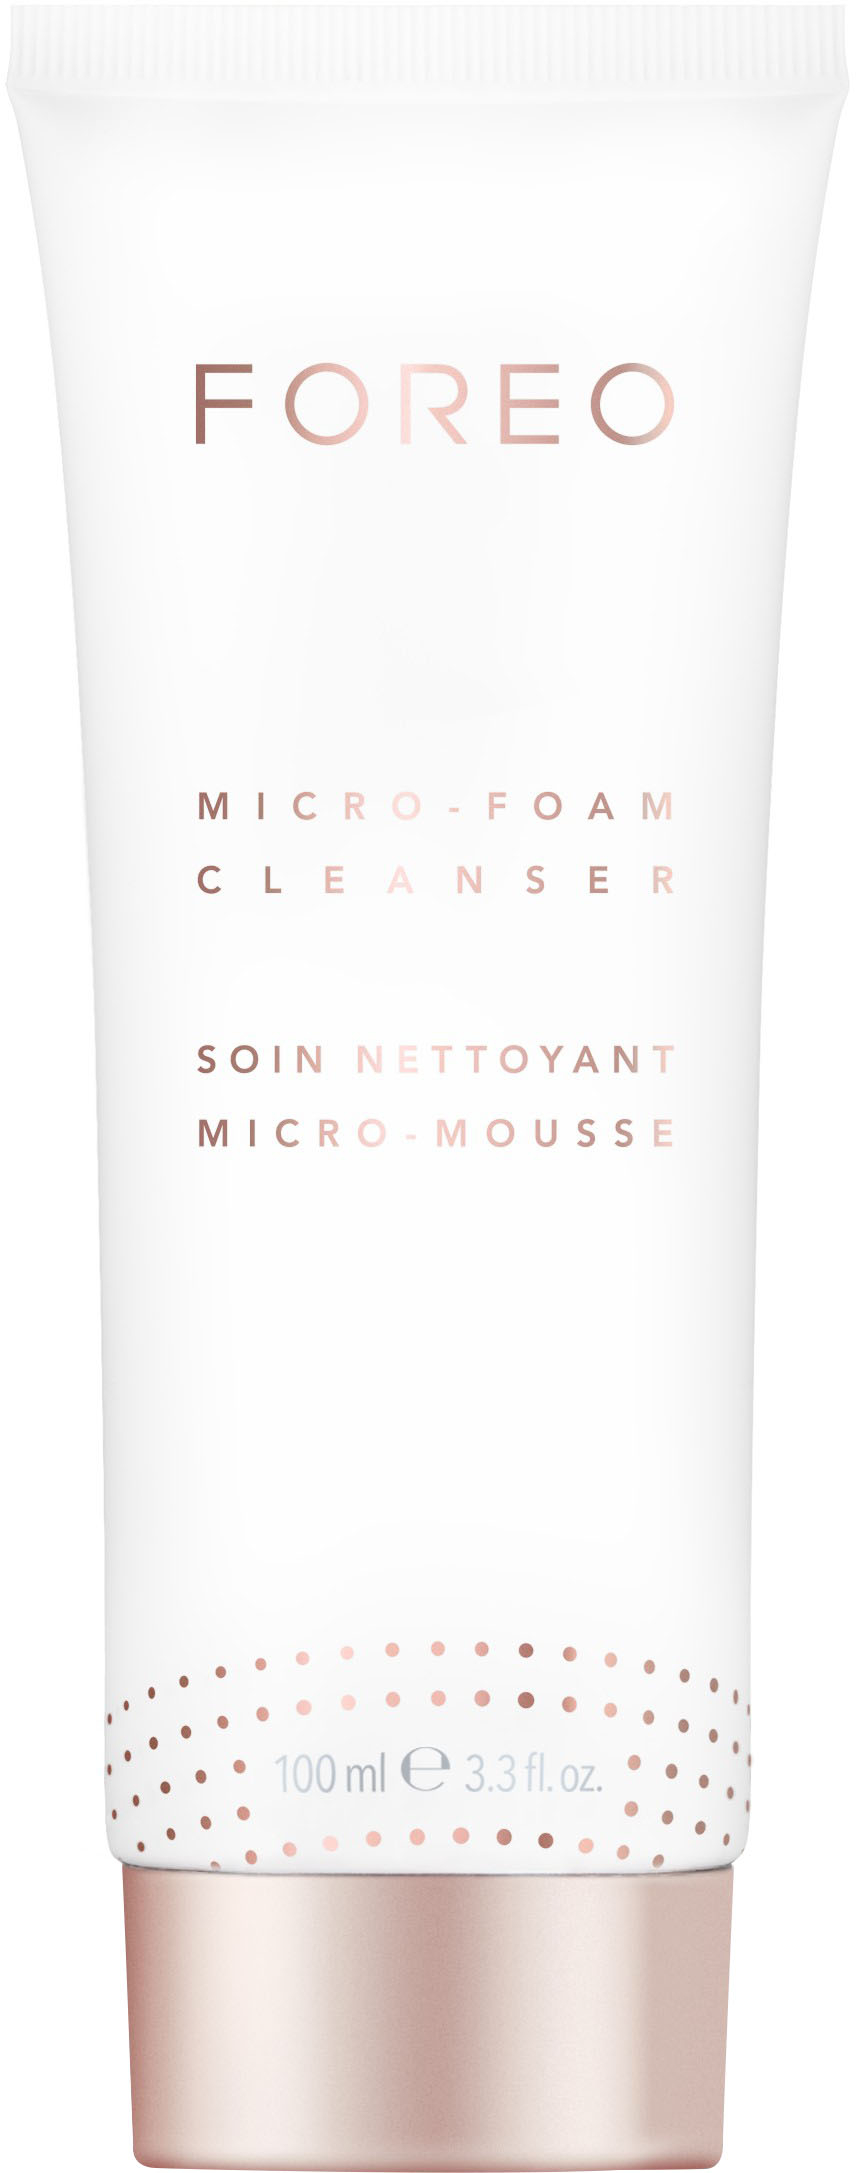 Image of FOREO - Micro-Foam Cleanser 100ml - White